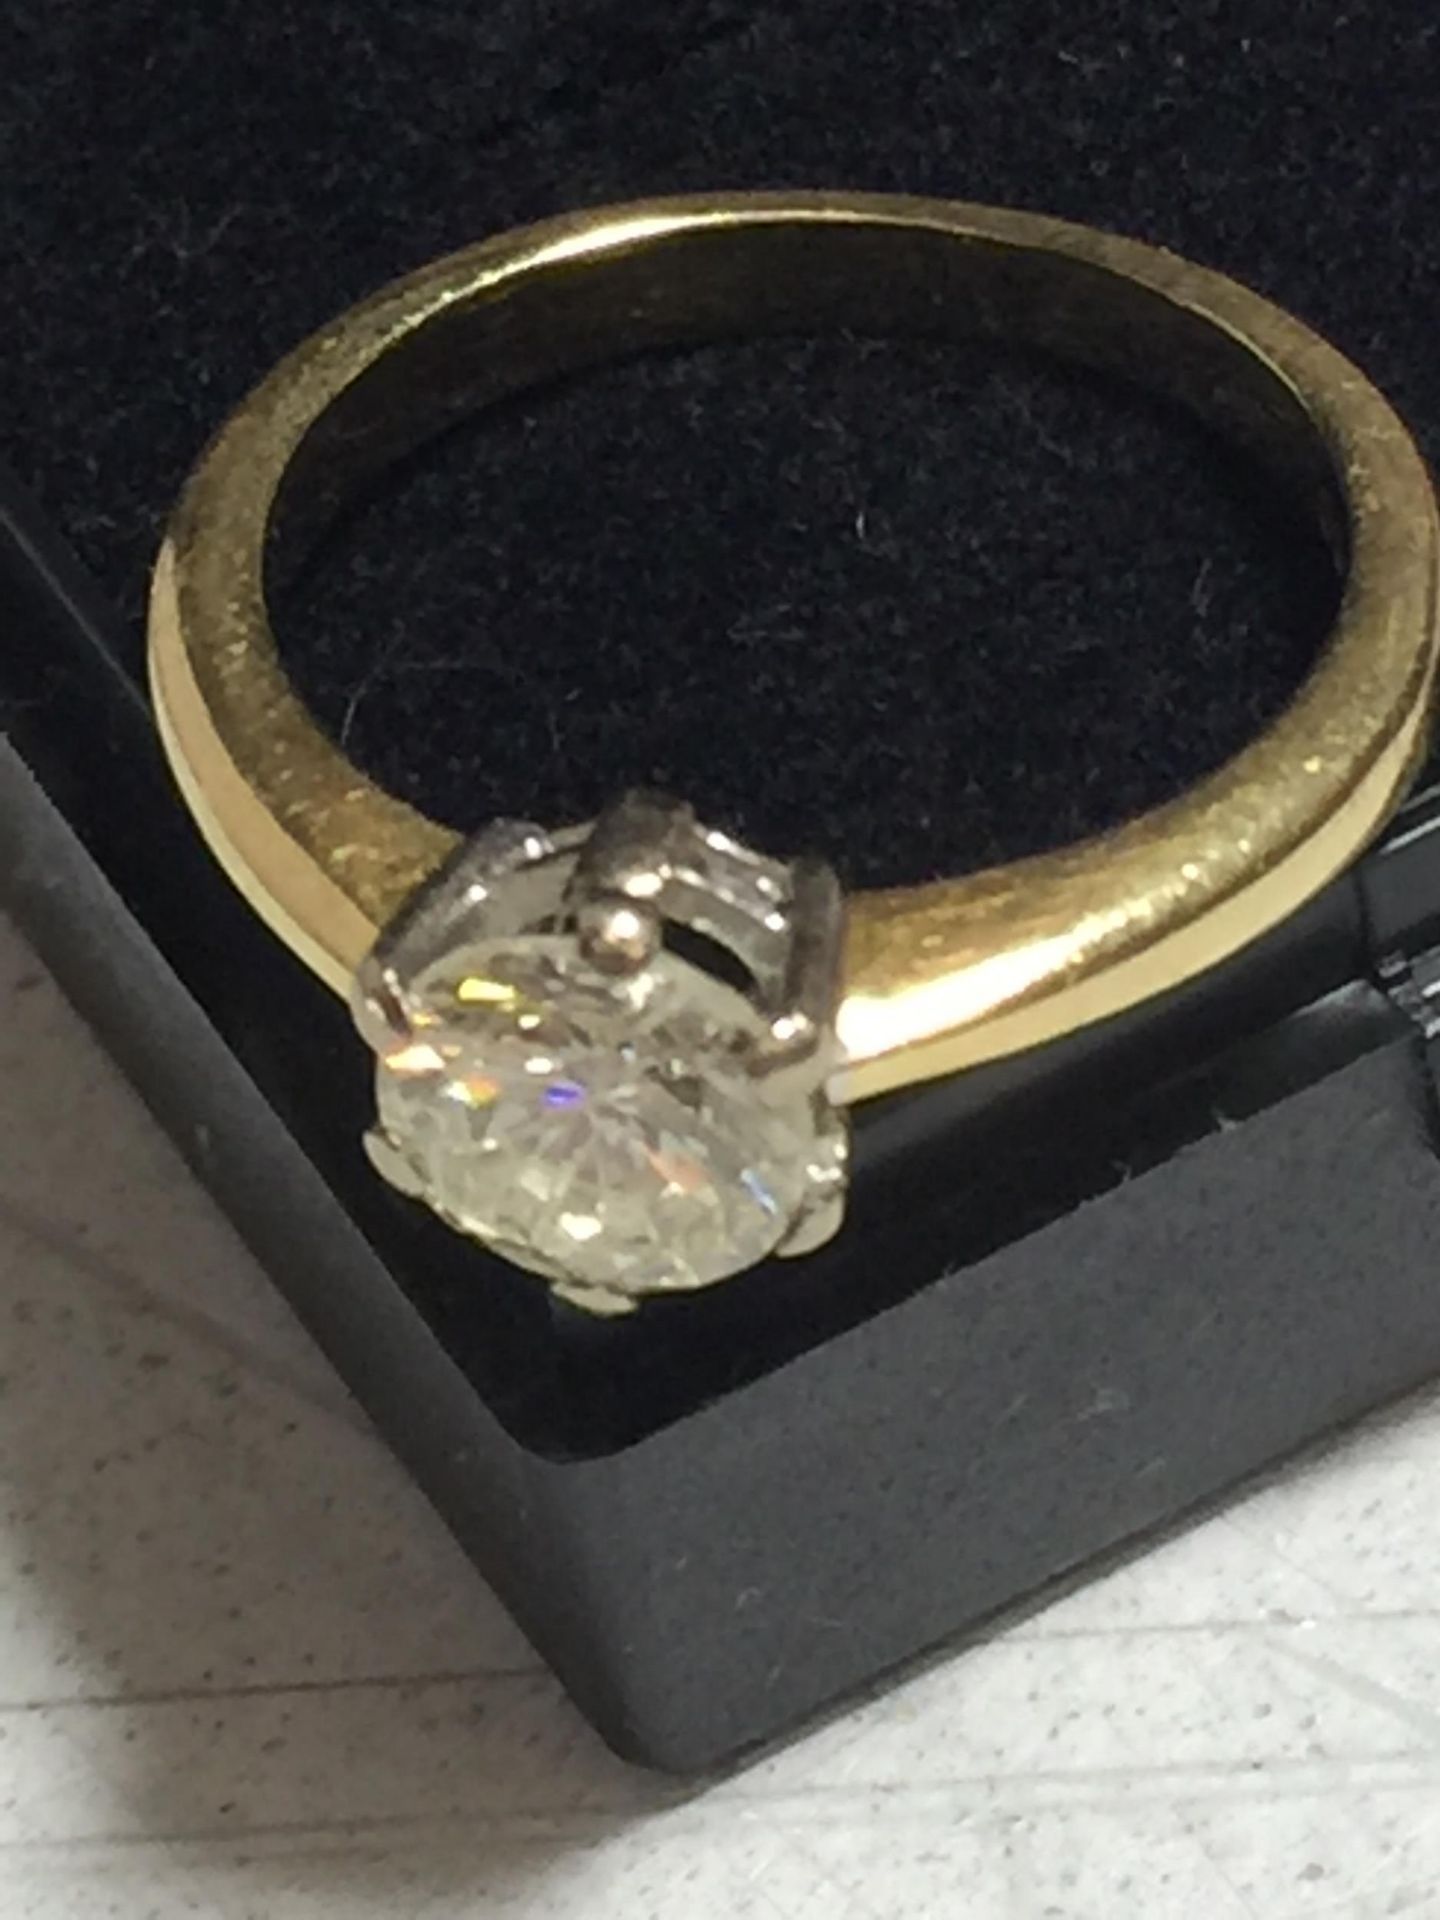 AN 18CT GOLD DIAMOND SOLITAIRE WITH 1 CARAT (APPROX) DIAMOND, SIZE K AND A HALF - Image 3 of 4